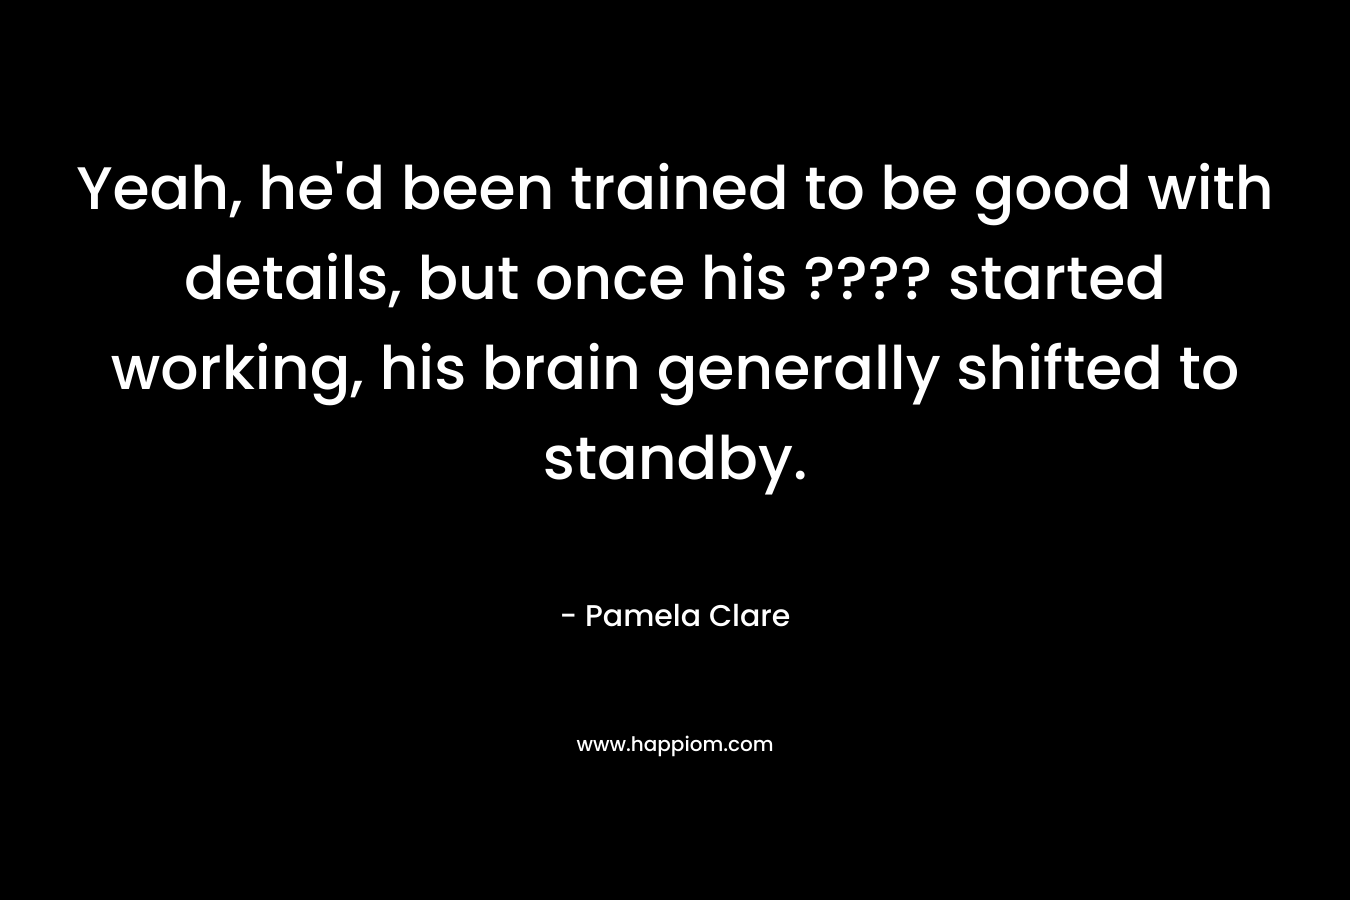 Yeah, he'd been trained to be good with details, but once his ???? started working, his brain generally shifted to standby.